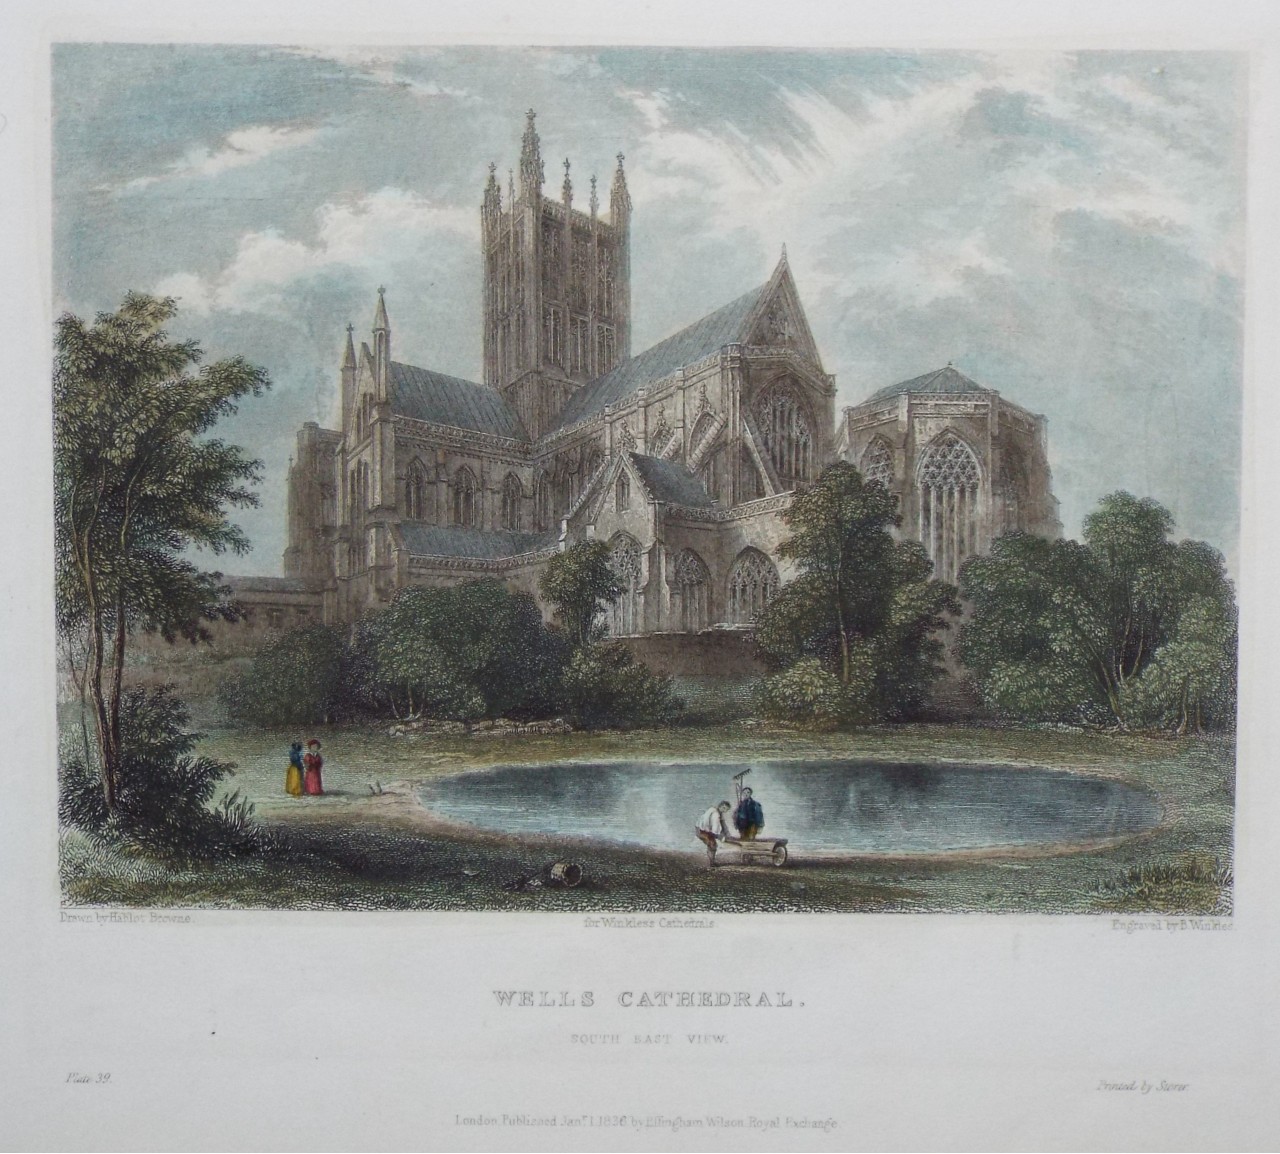 Print - Wells Cathedral. South East View - Winkles